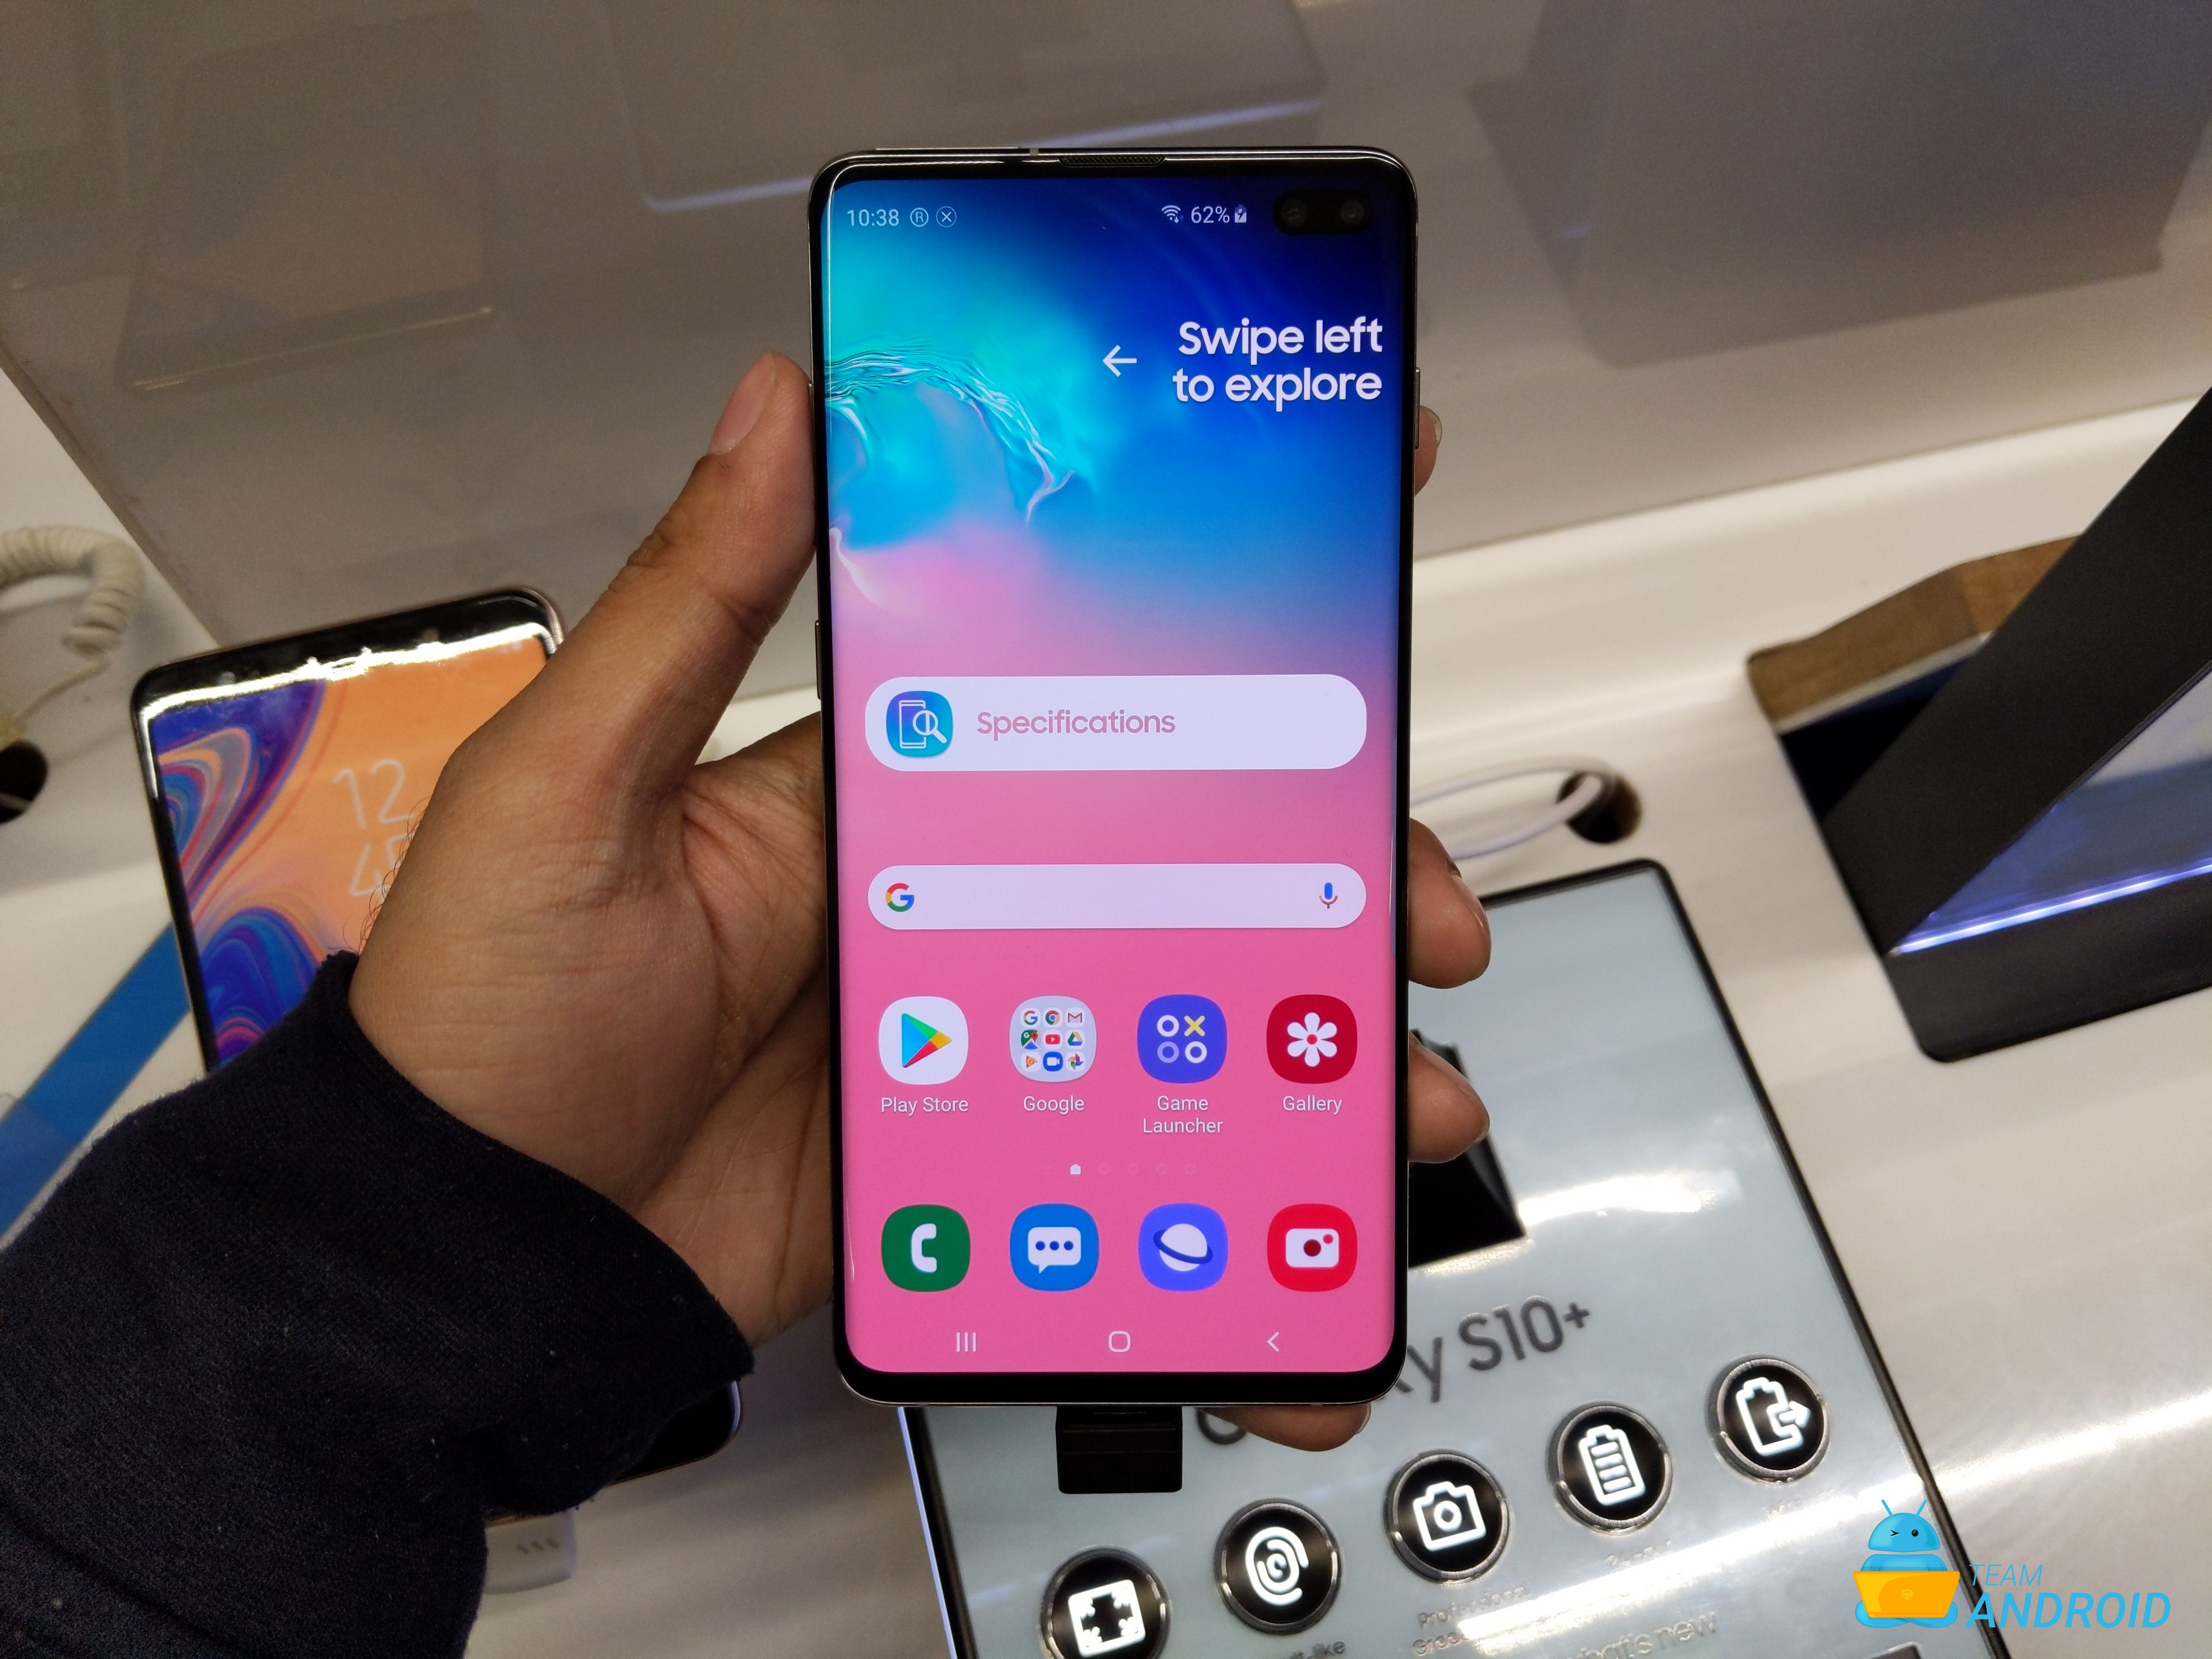 Samsung Galaxy S10 model numbers